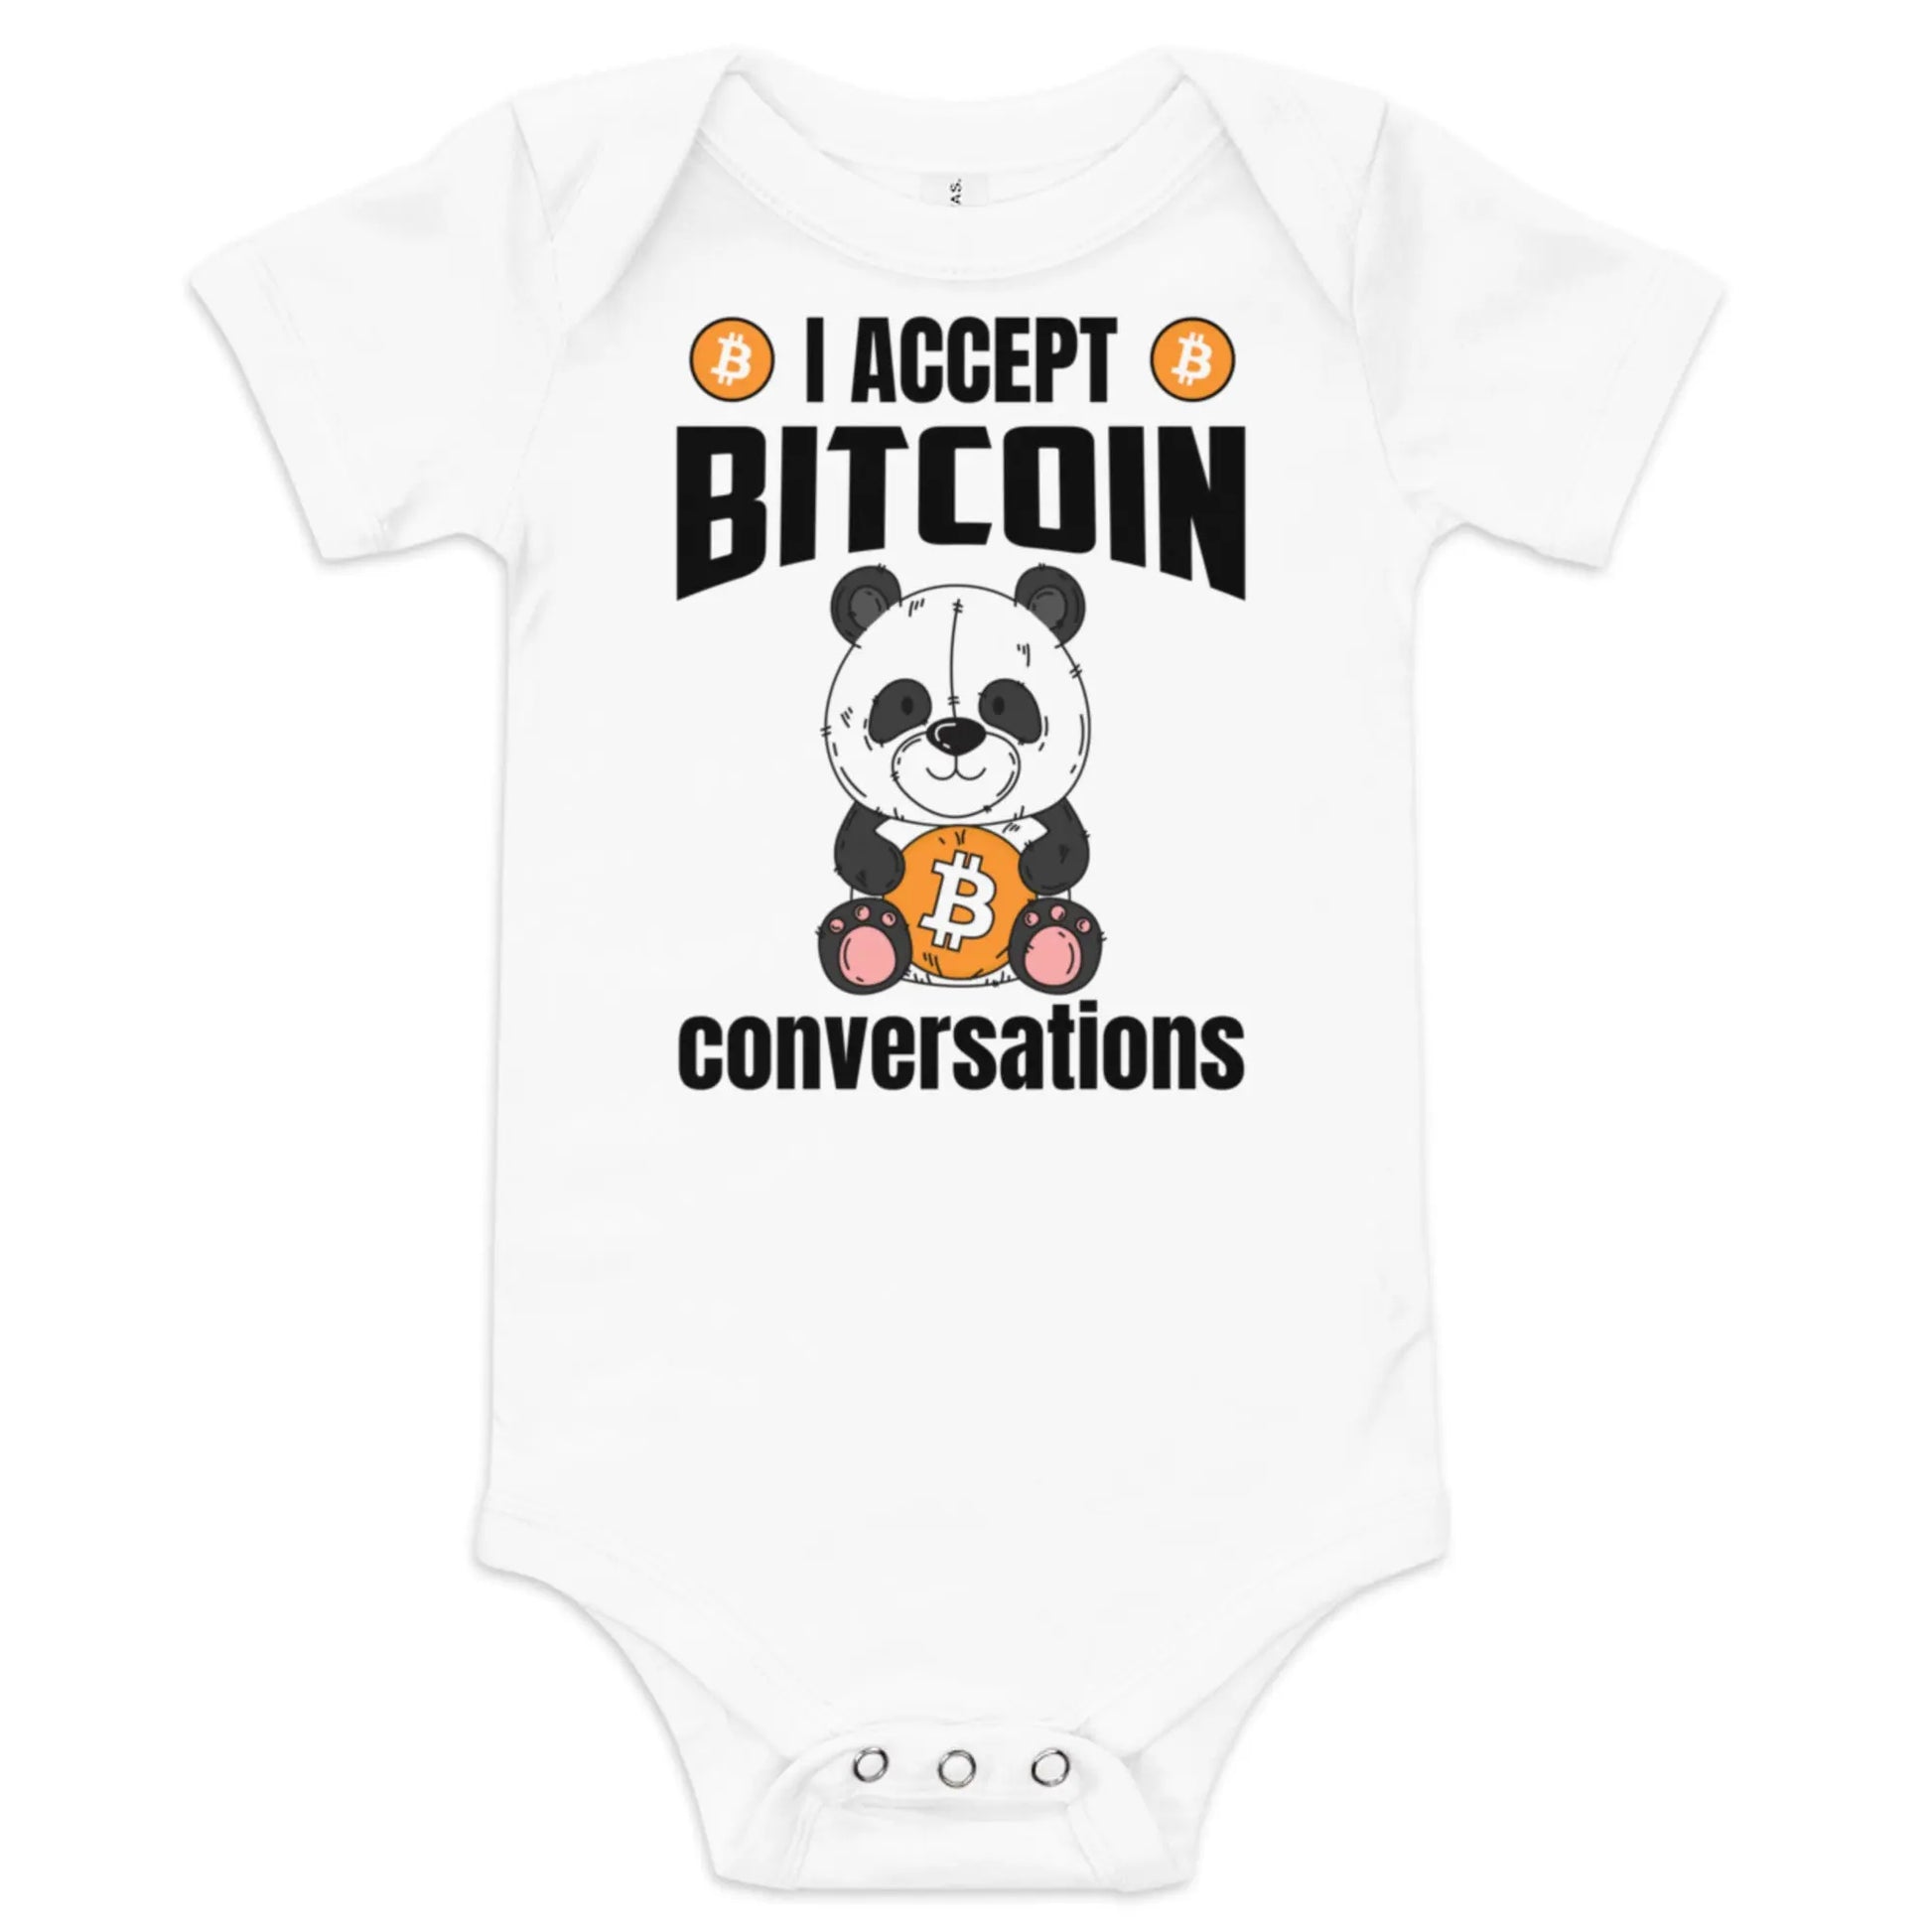 I Accept Bitcoin Conversations - Baby Bitcoin Body Suit - One Piece with Short Sleeve White